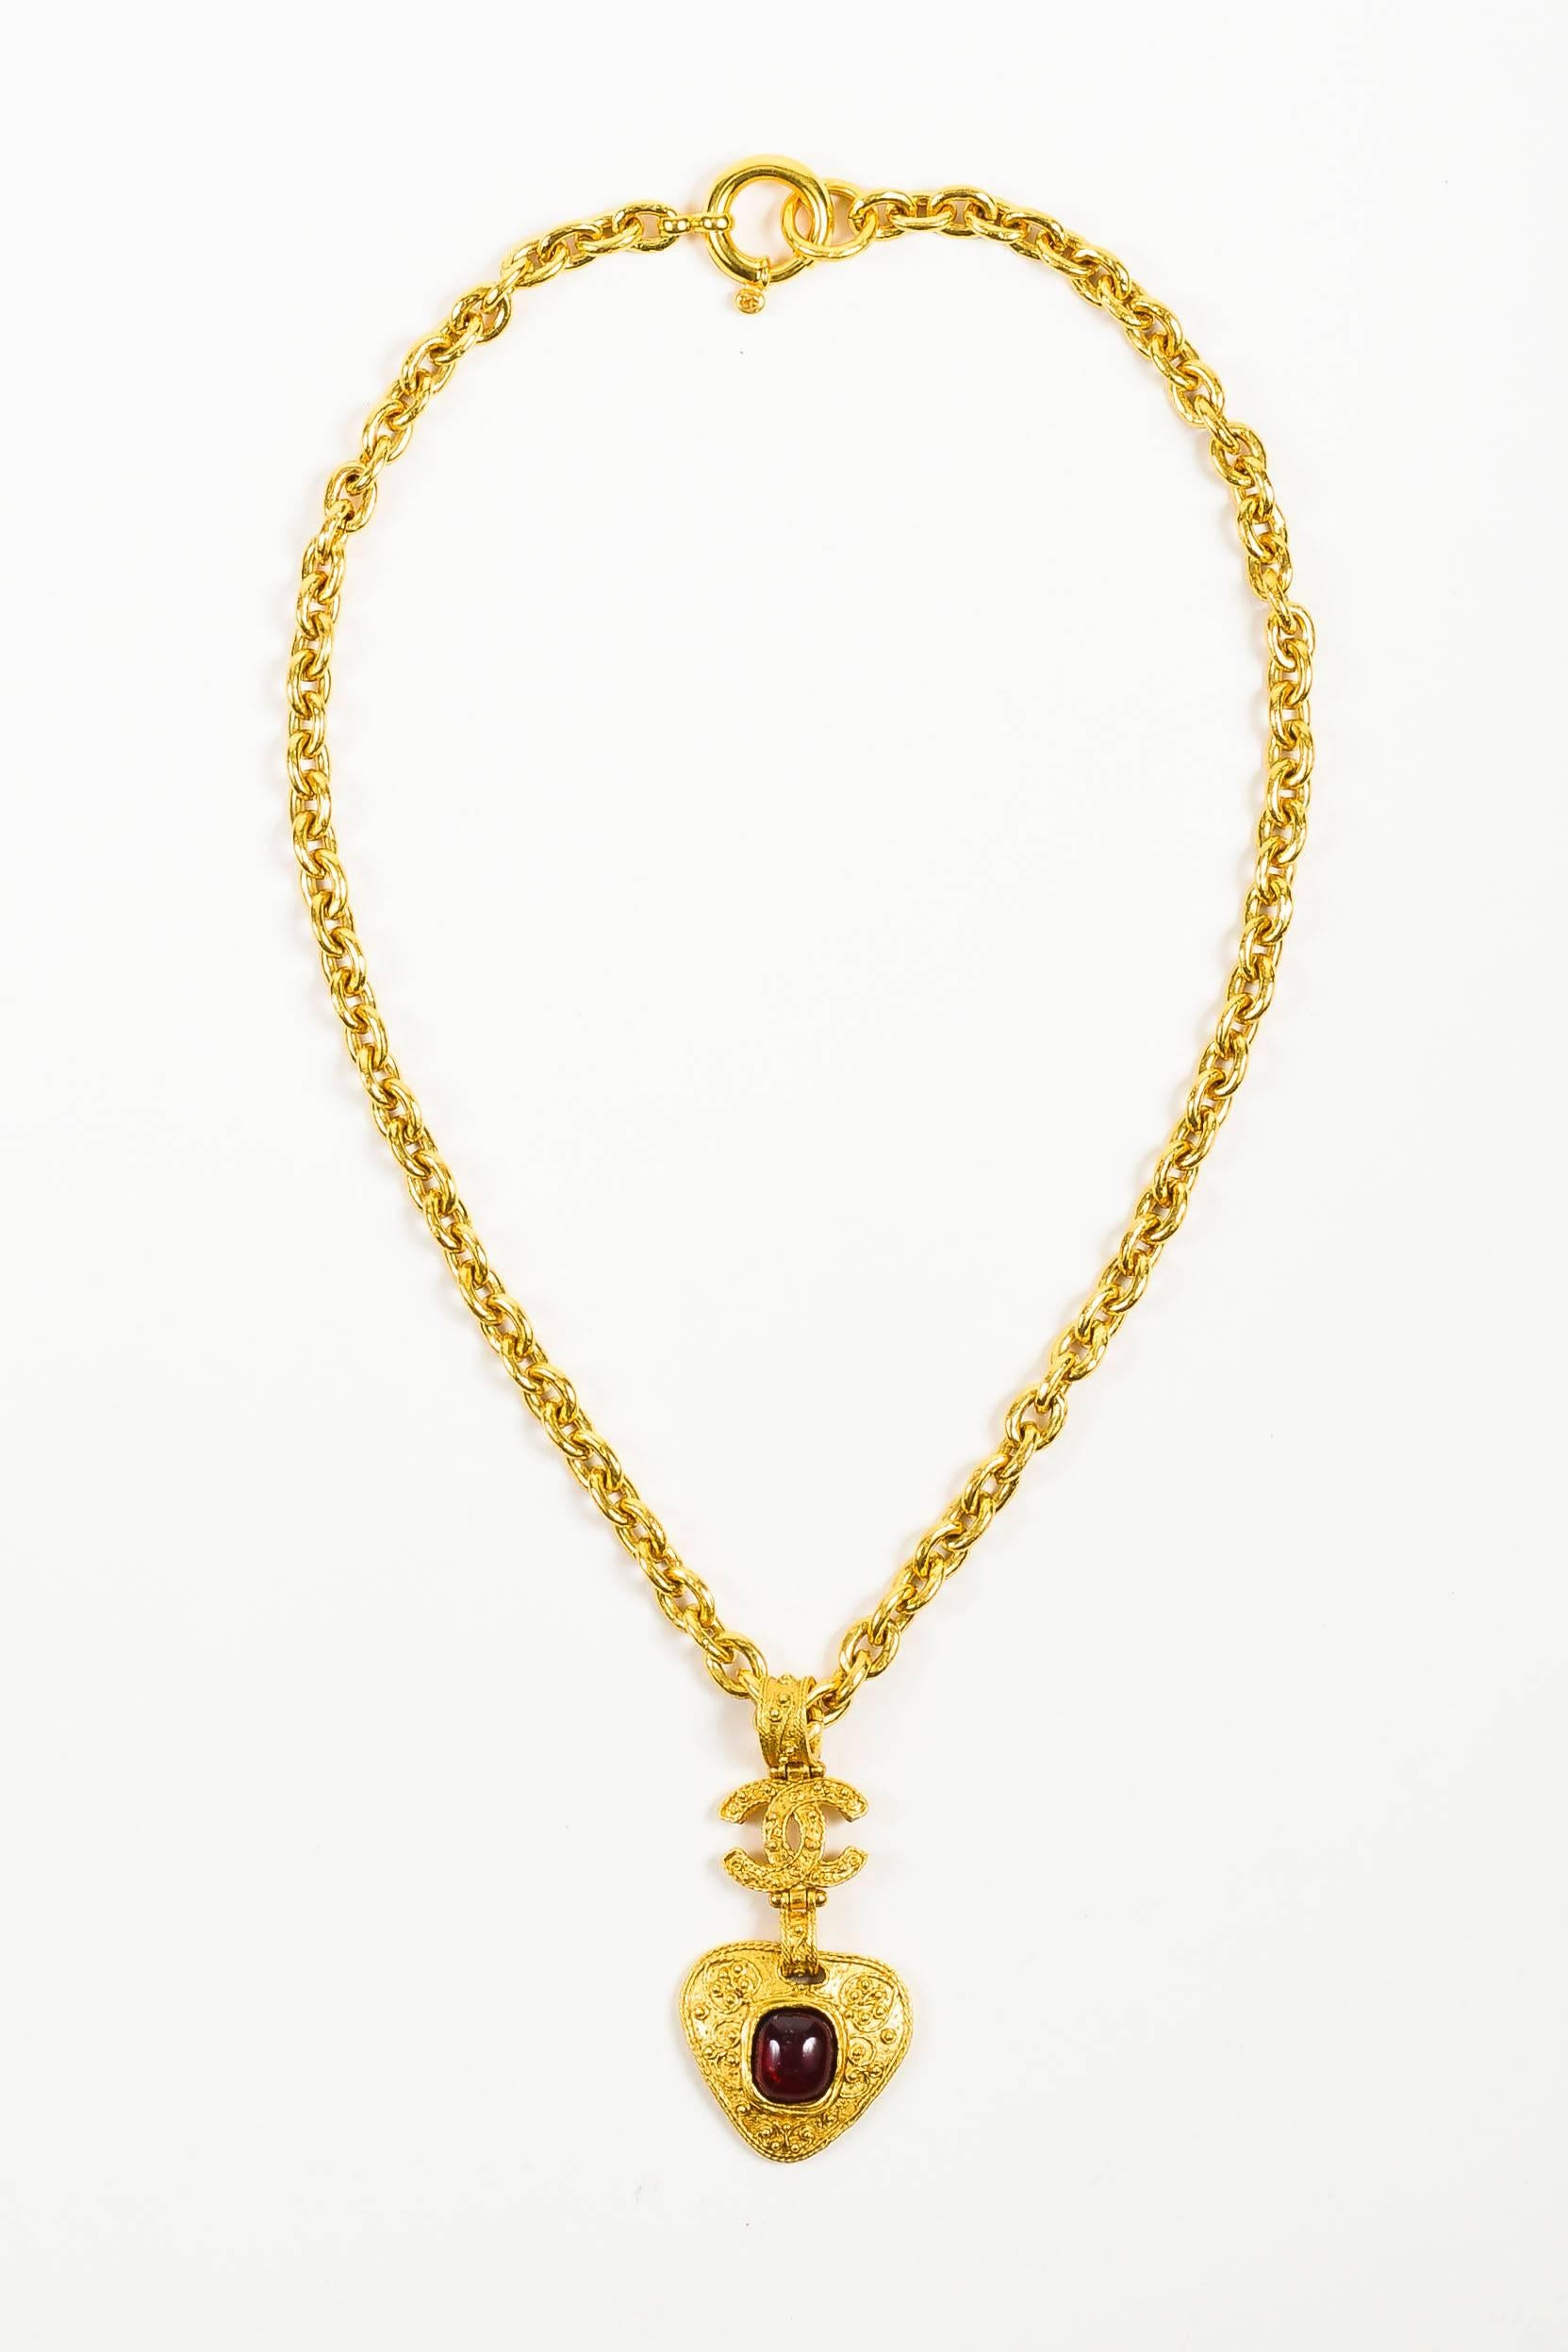 Ornate, vintage Chanel necklace from the 1994 Fall Collection. This stunning piece adds instant upscale glamour to any ensemble. Gold tone metal. Long, rolo chain. Textured drop pendant featuring the iconic 'CC' logo and a glossy, red Gripoix glass